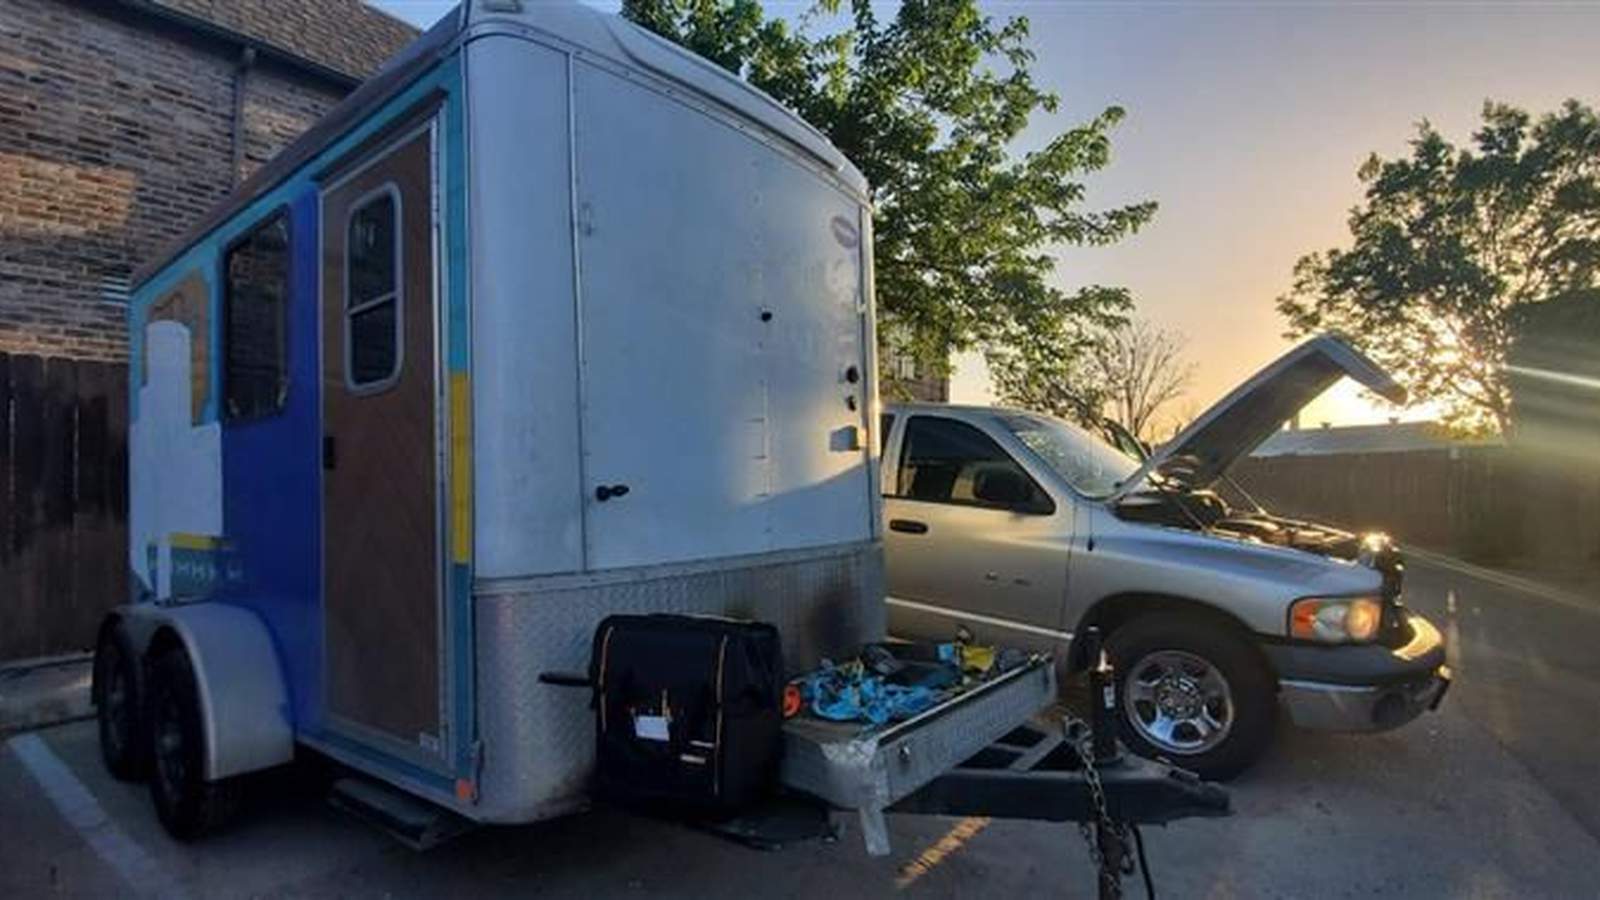 Stolen dog grooming trailer now found, owner says